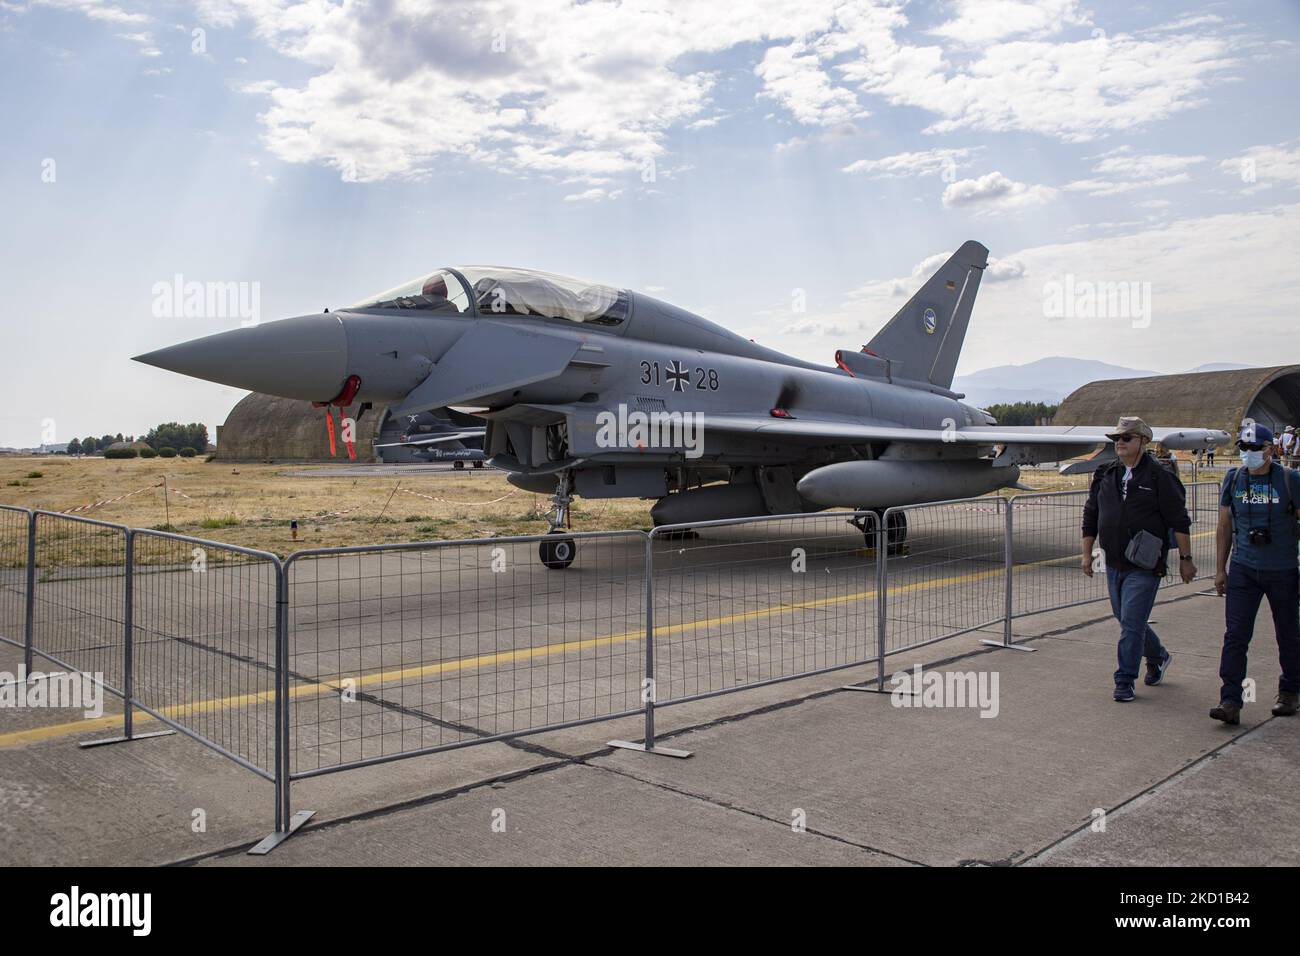 German Air Force Luftwaffe Eurofighter Typhoon EF2000 military combat jet aircraft as seen on a static display with people around during the Athens Flying Week 2021 at Tanagra Air Base Airport. The fighter has the registration 30+28, one of the 141 that Germany owns with 38 Tranche 4 in order. Eurofighter Typhoon is a twin-engine canard delta wing a multirole fighting jet manufactured by Airbus, BAE Systems and Leonardo. NATO countries UK, Germany, Italy and Spain are the prime users. Athens, Greece on September 5, 2021 (Photo by Nicolas Economou/NurPhoto) Stock Photo